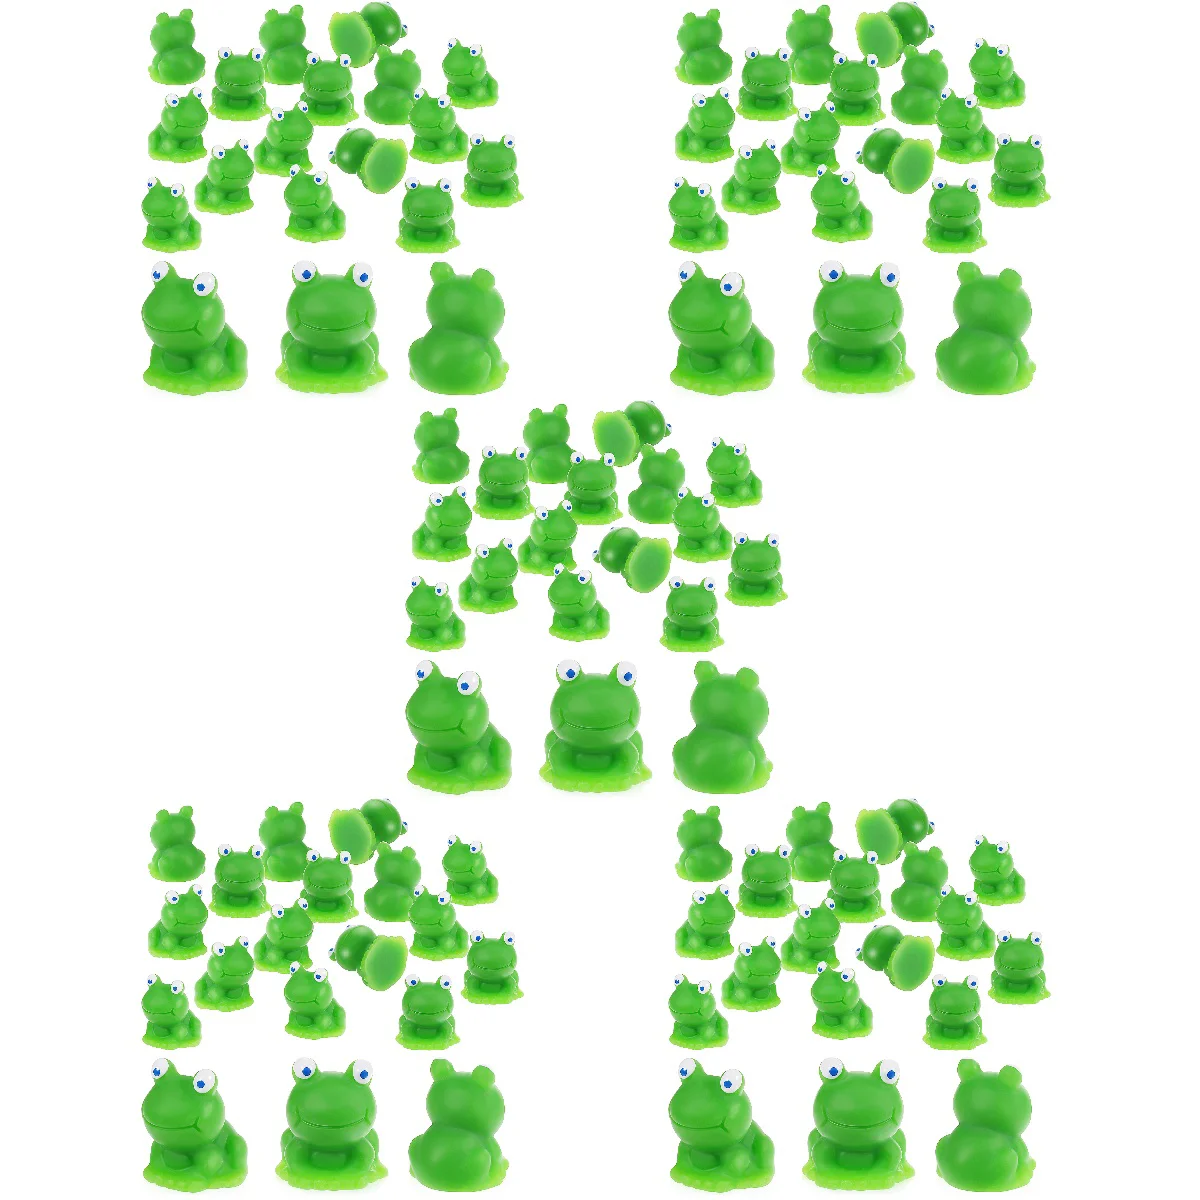 100 Pcs Artificial Moss Little Frog Miniature Landscape Statues Figurines Model Small Frogs Ornaments Resin